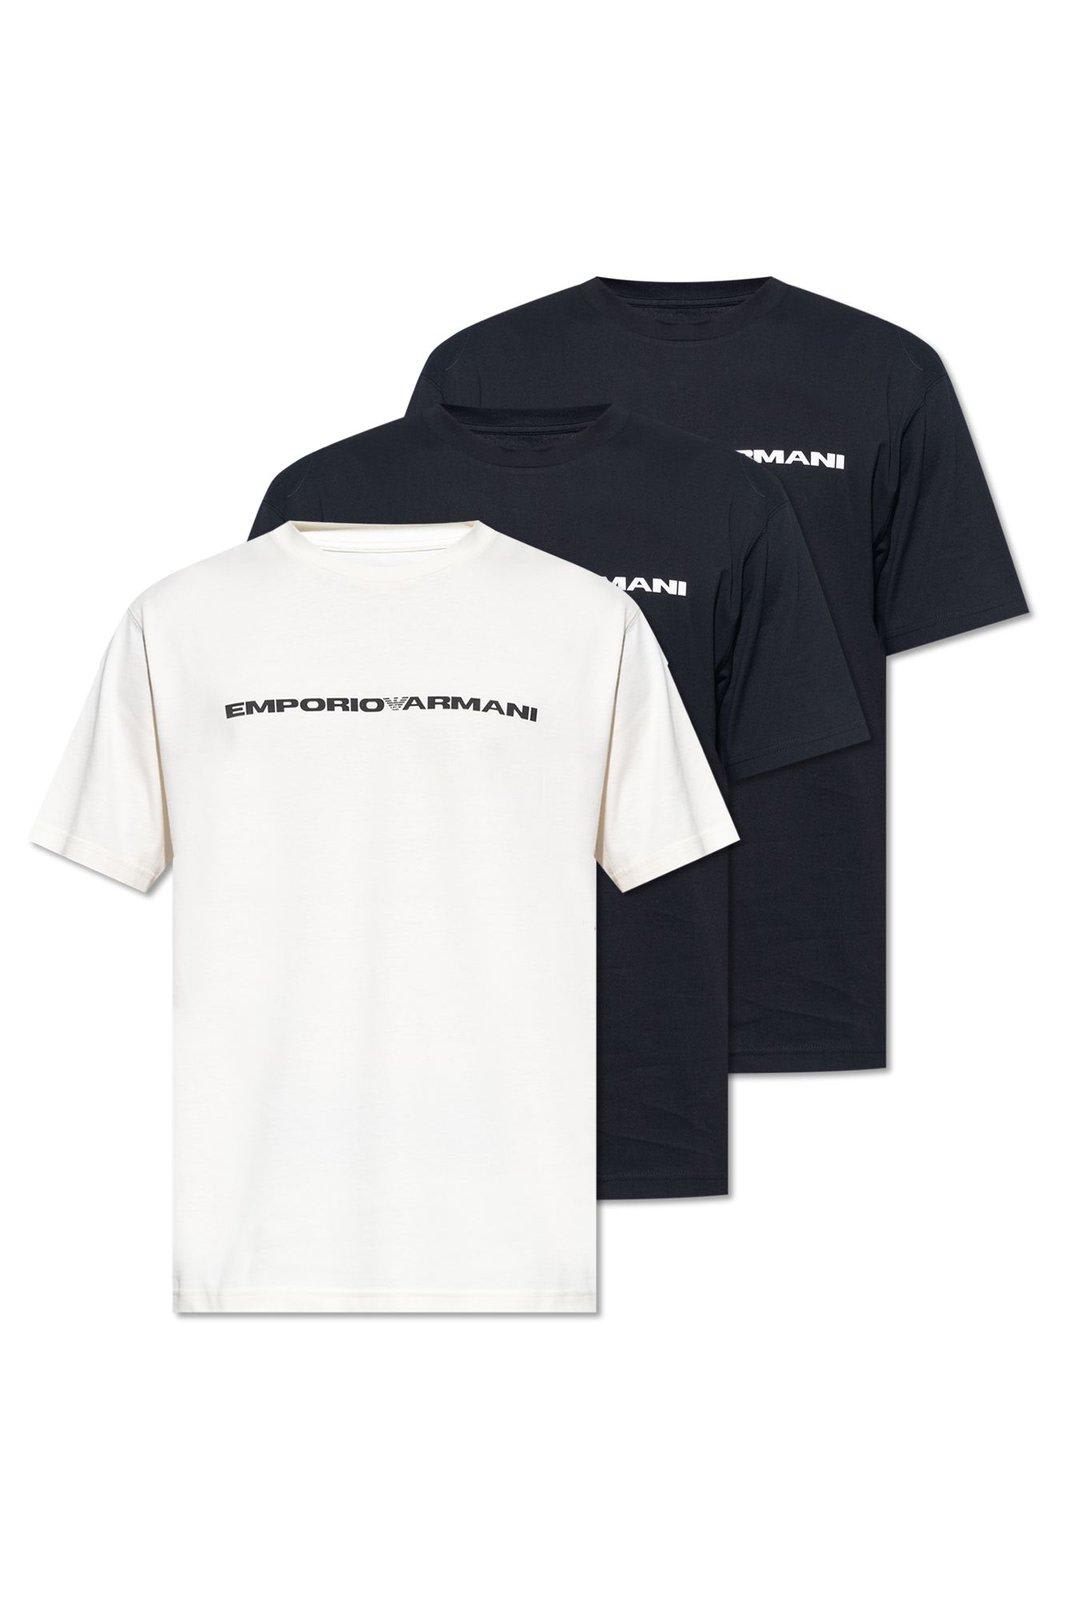 Emporio Armani Branded T-shirt 3 Pack In Variante Print